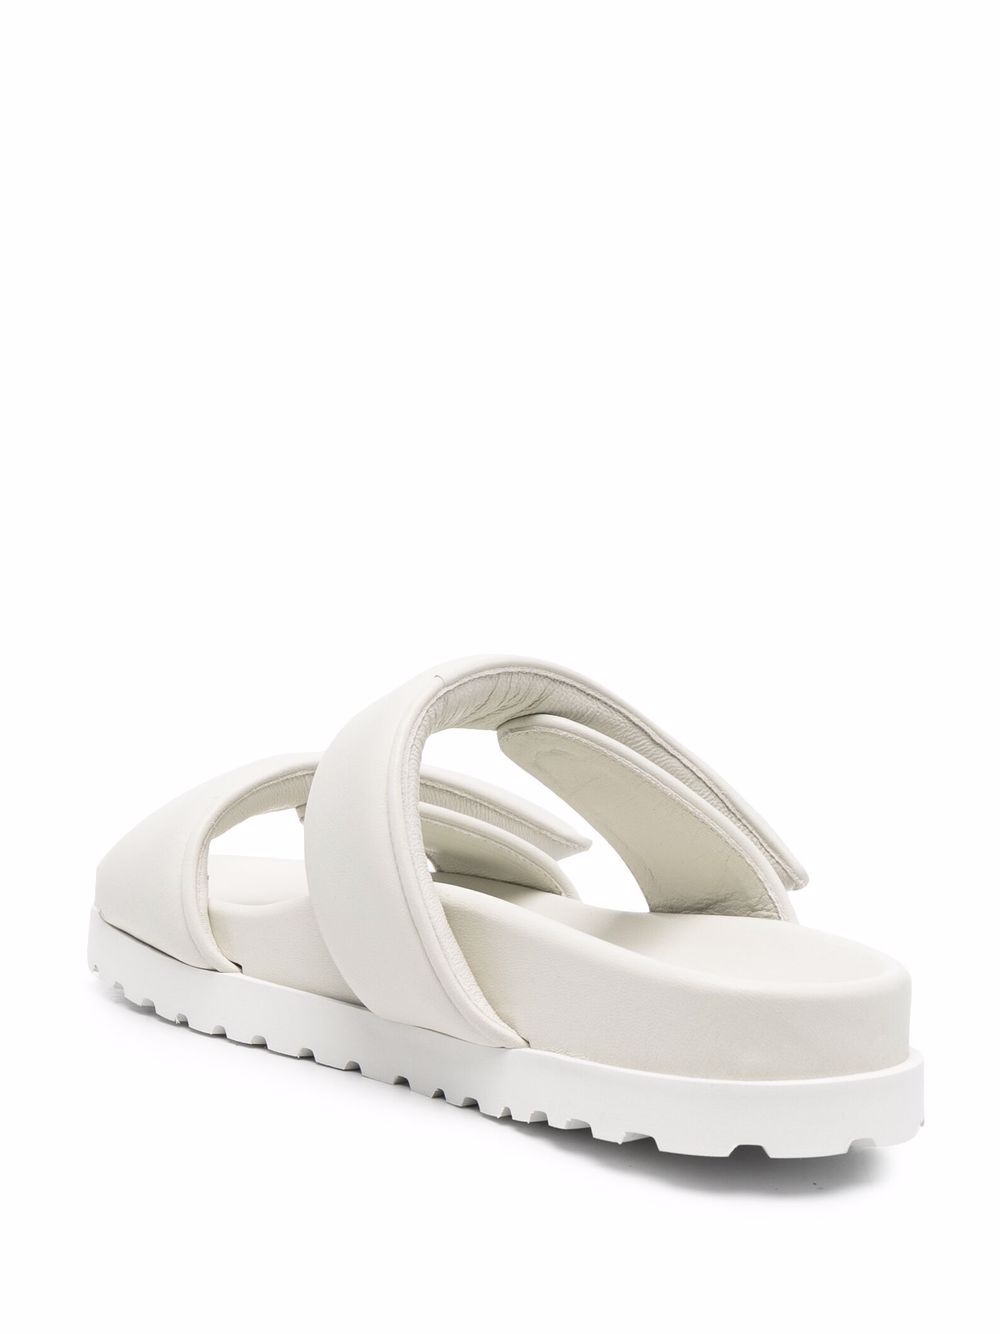 Shop GIABORGHINI GIA X PERNILLE flat sandals with Express Delivery ...